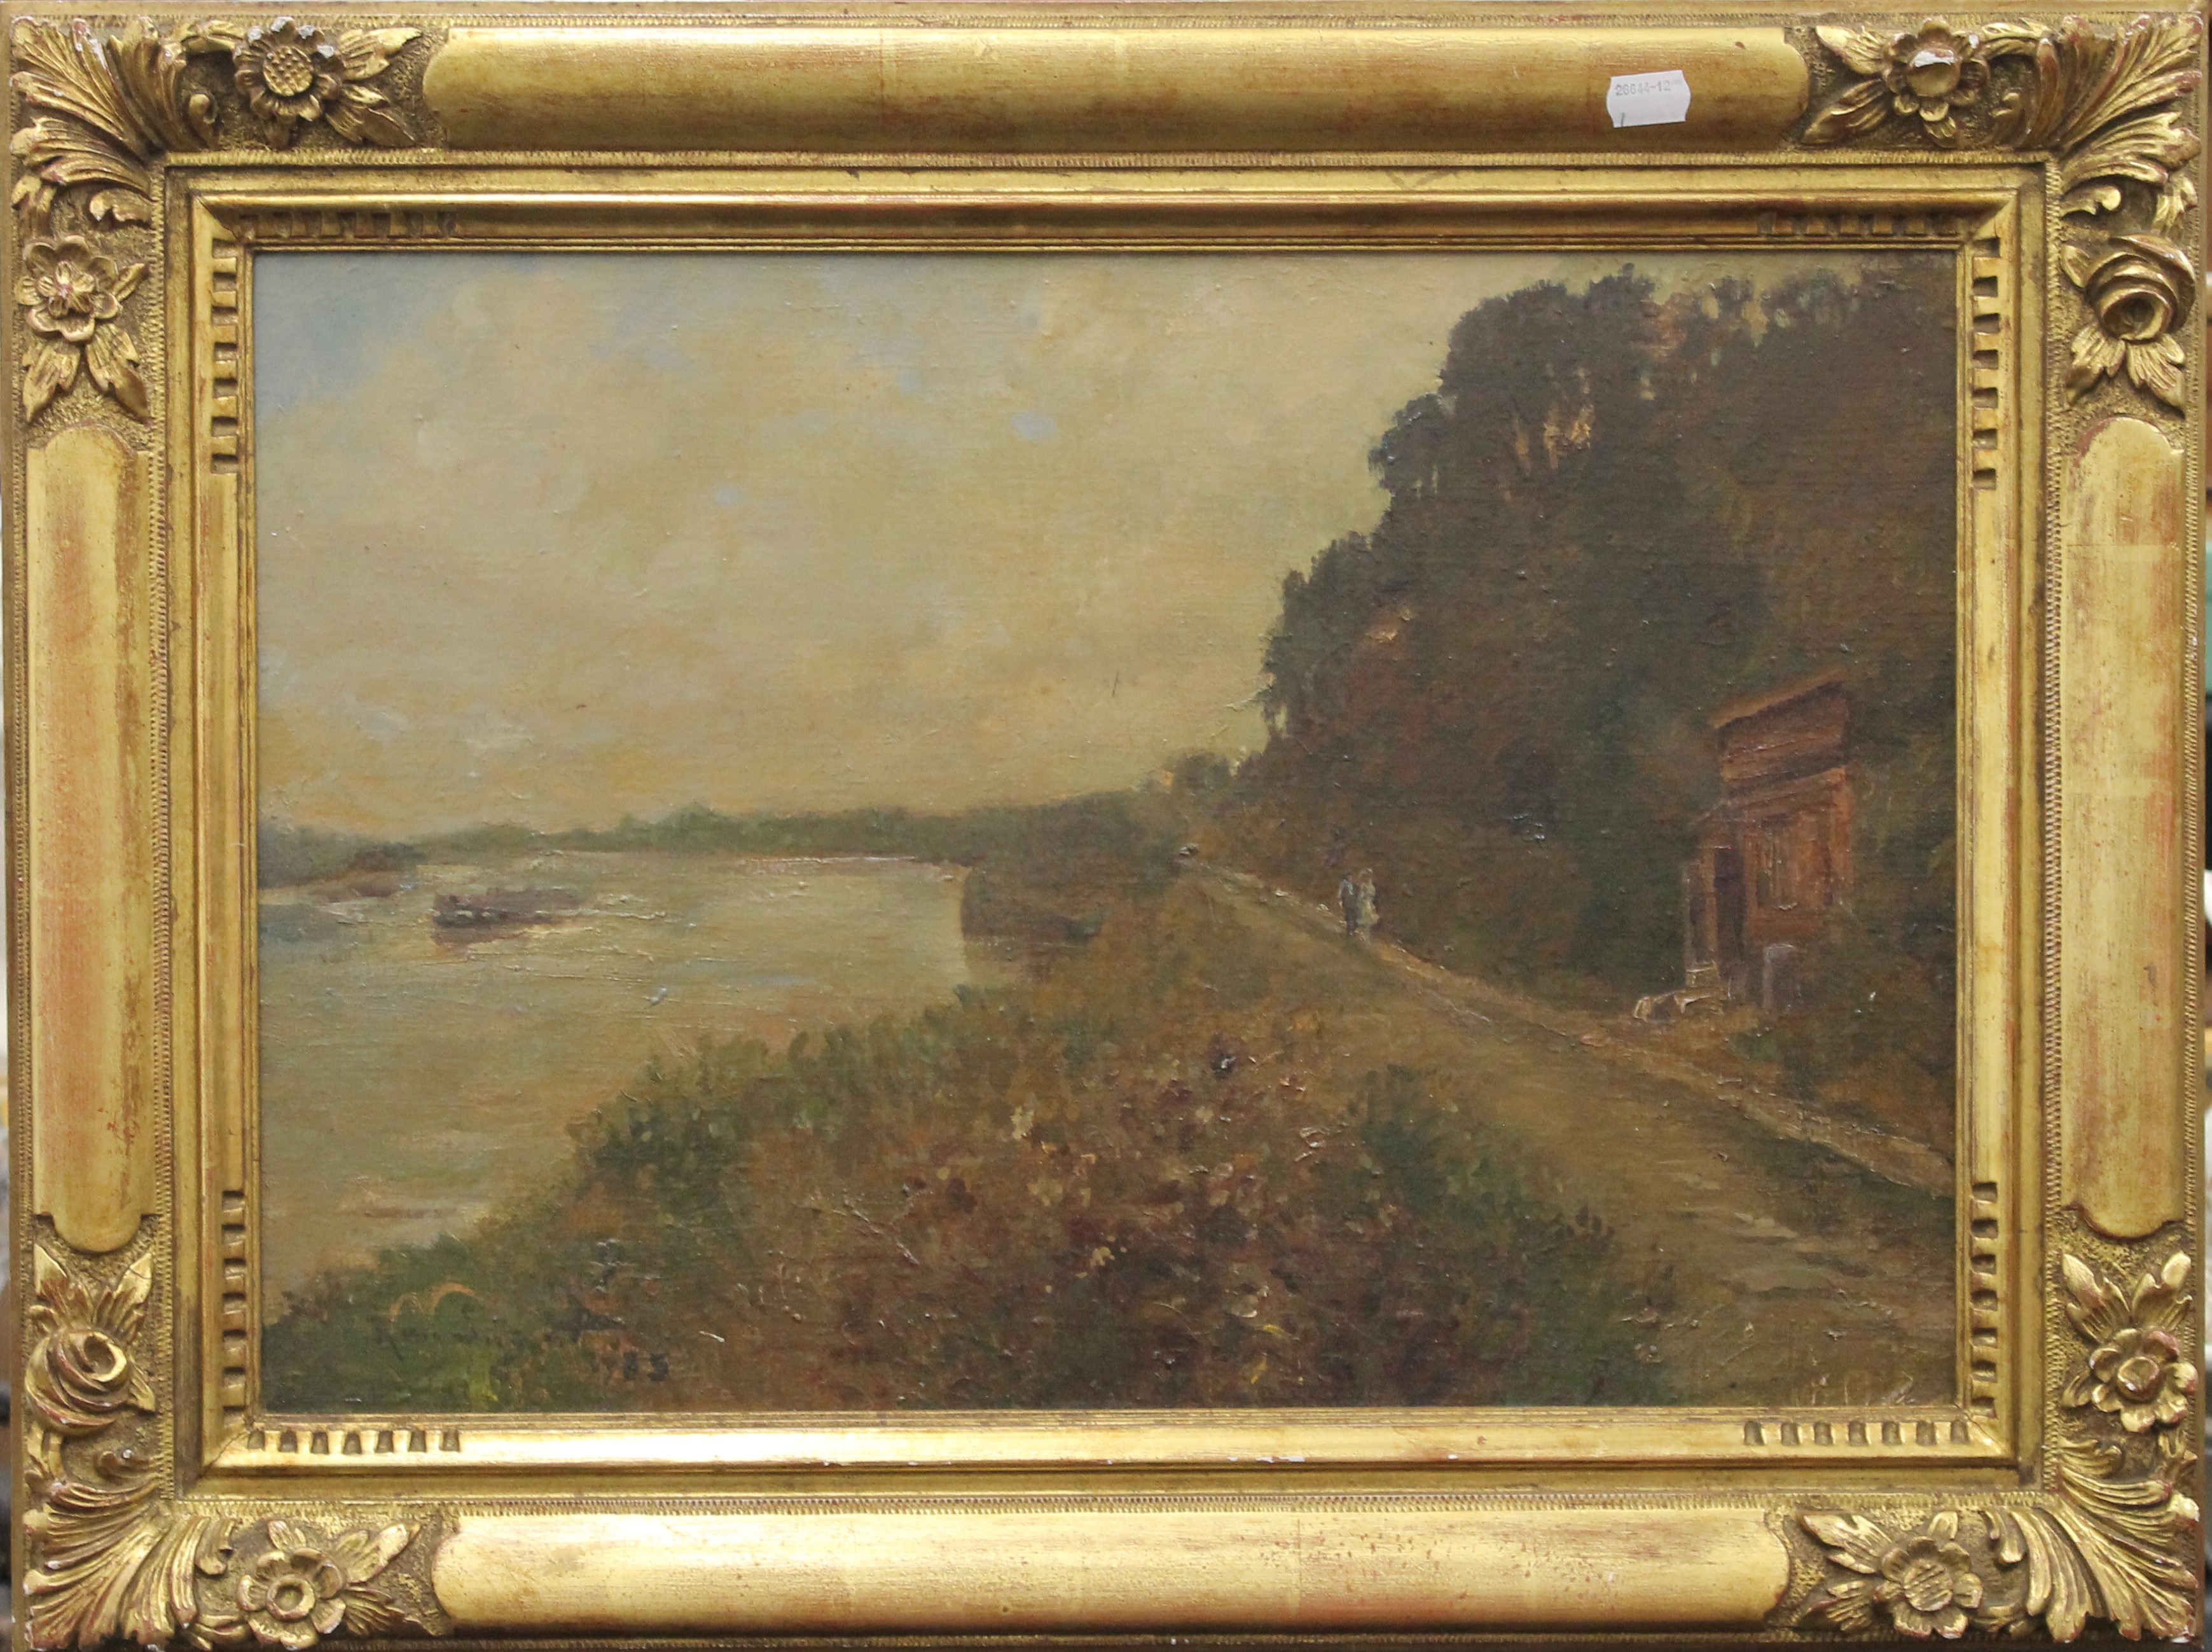 RAY SINGOT, Figures beside a Lake, oil on canvas, signed and dated 1935, framed. 53.5 x 36.5 cm. - Image 2 of 4